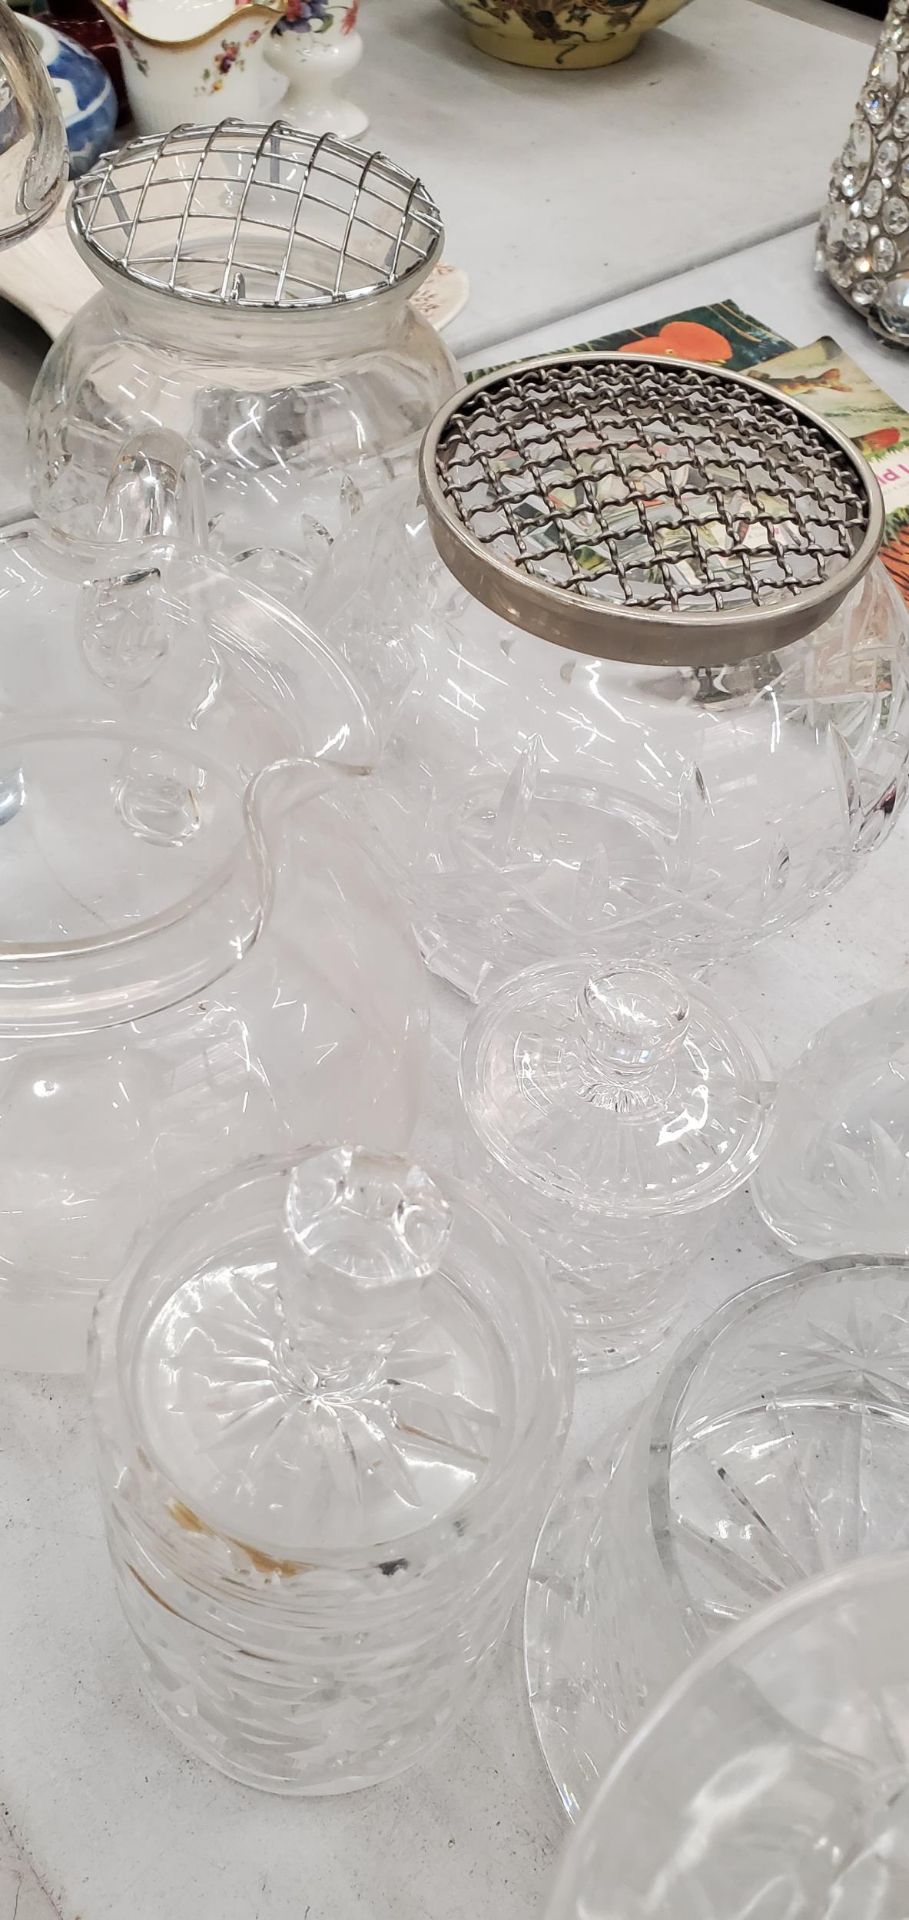 A QUANTITY OF GLASSWARE TO INCLUDE VASES, ROSE BOWLS, STORAGE JARS, DESSERT BOWLS, ETC - Image 2 of 2